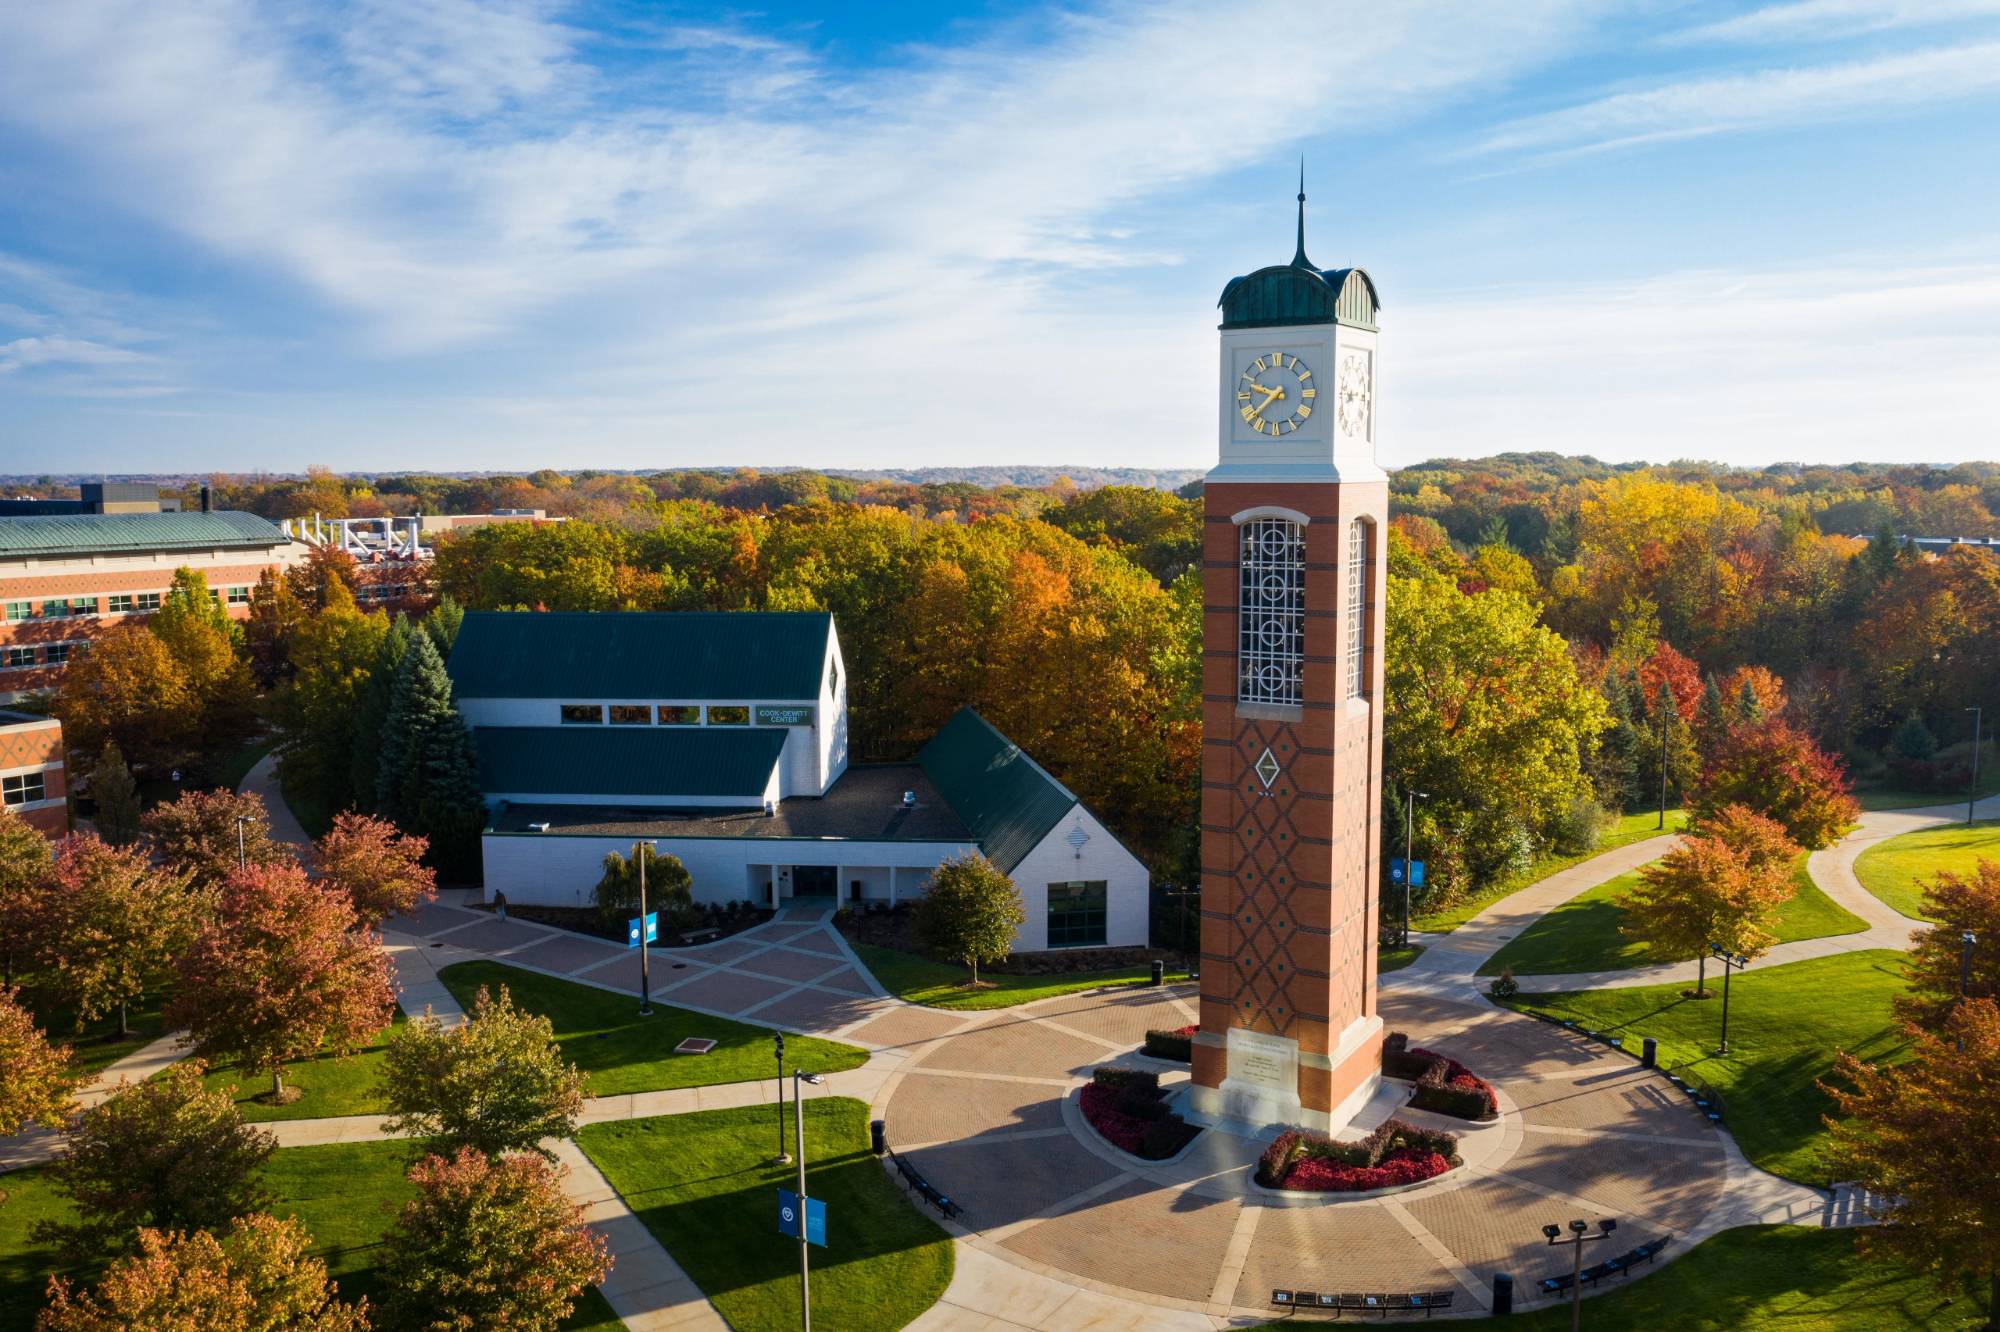 Aerial Image of the Clocktower on Allendale's Campus